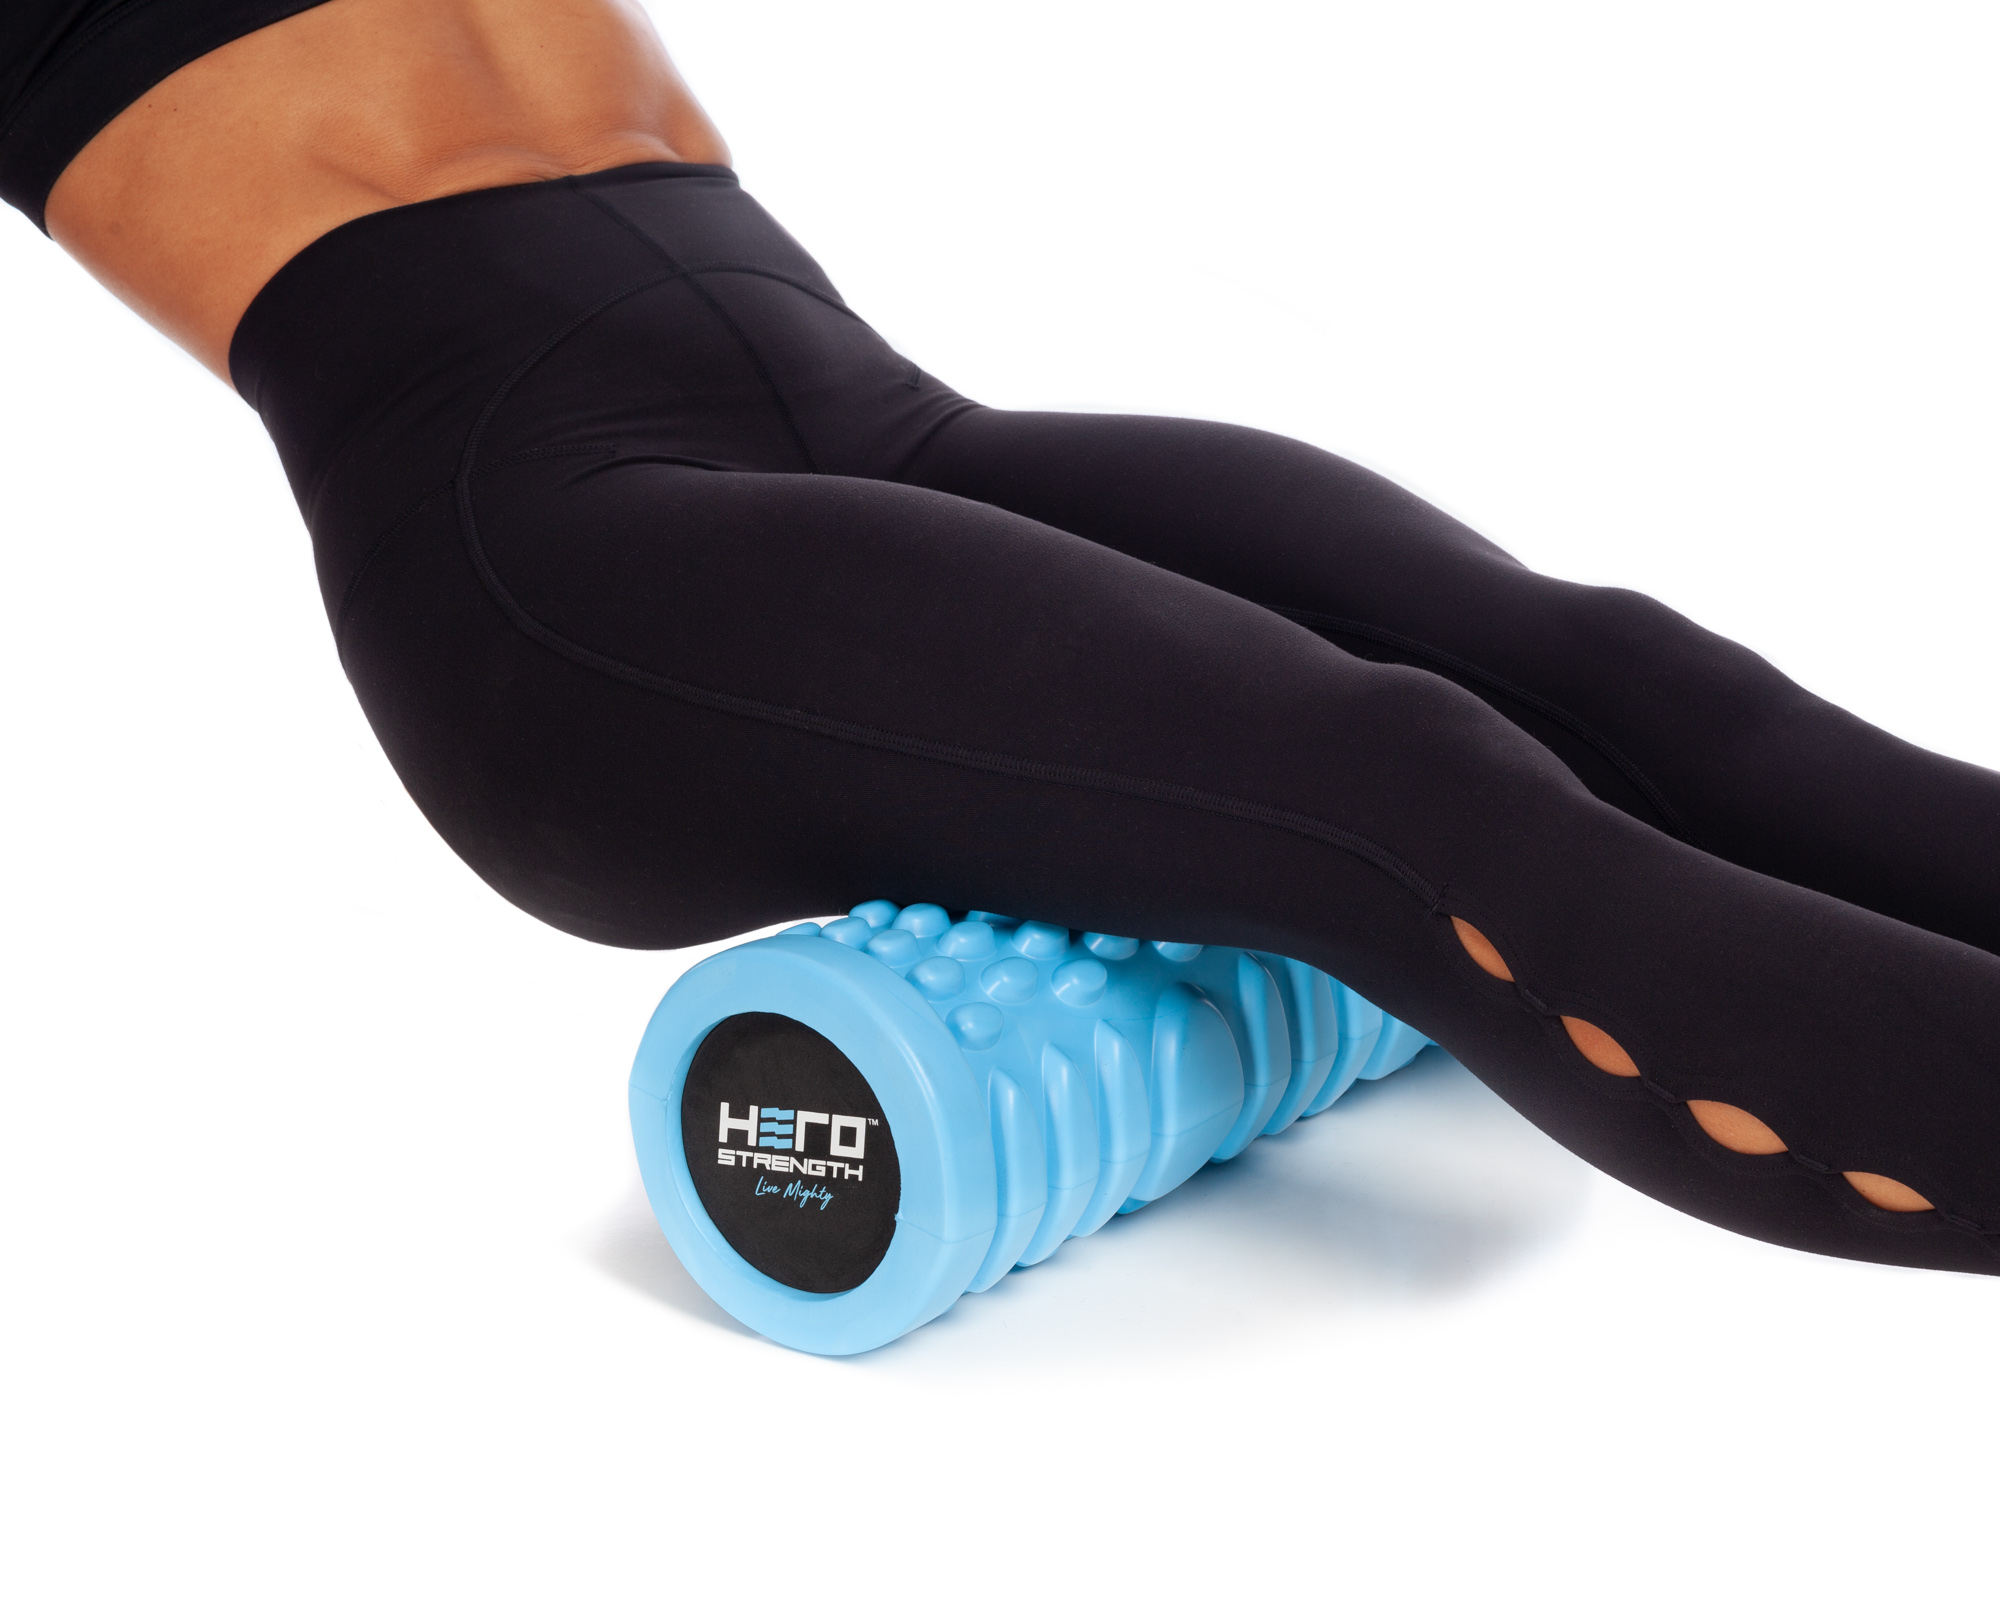 Foam Exercise rollers provide the user with the ability to control the  healing and recovery process by applying pressure in precise locations.